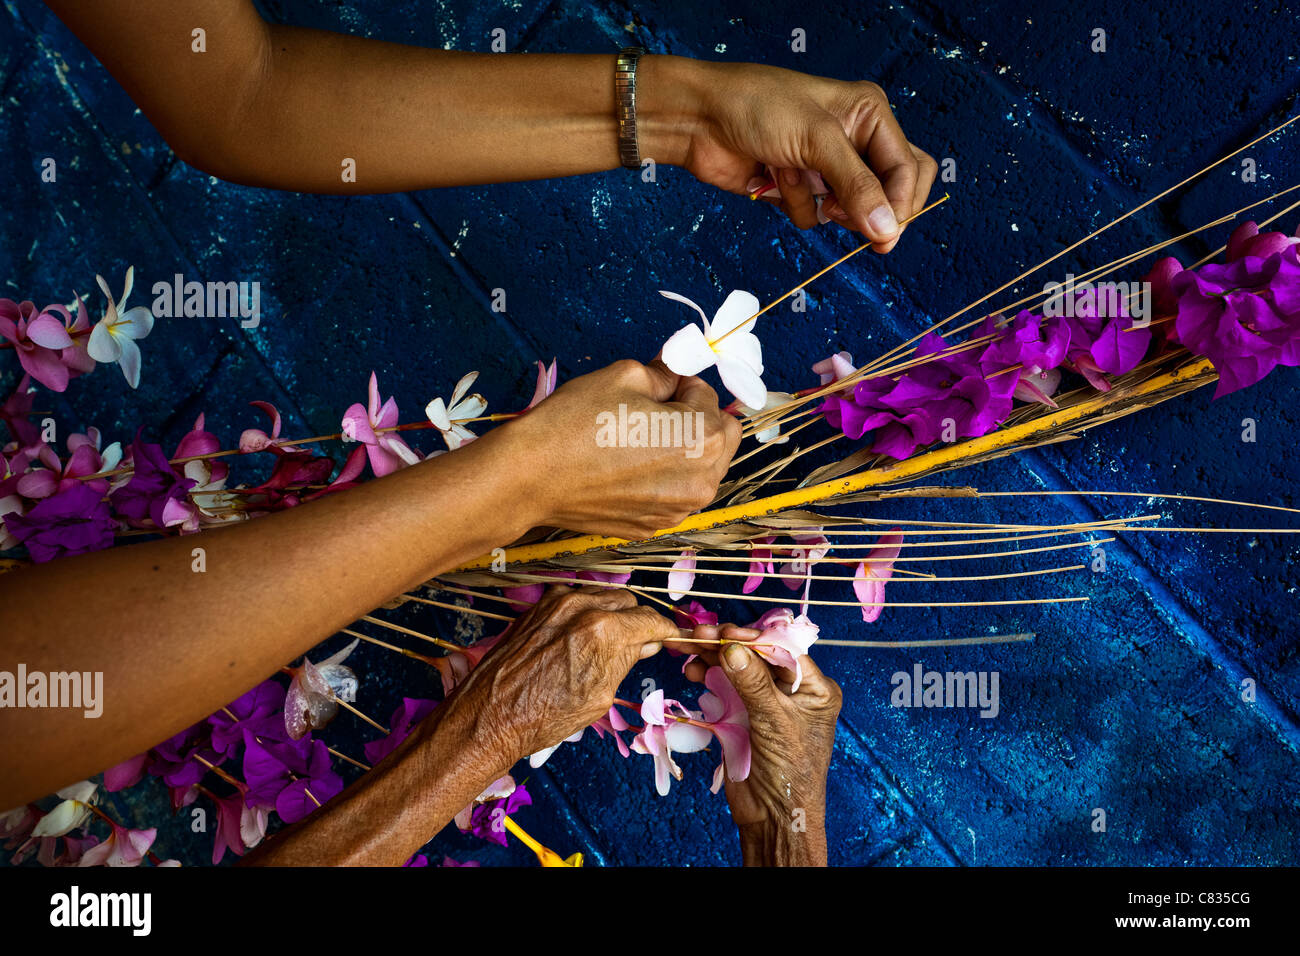 Salvadoran women work on a floral ornament during the Flower & Palm Festival in Panchimalco, El Salvador. Stock Photo